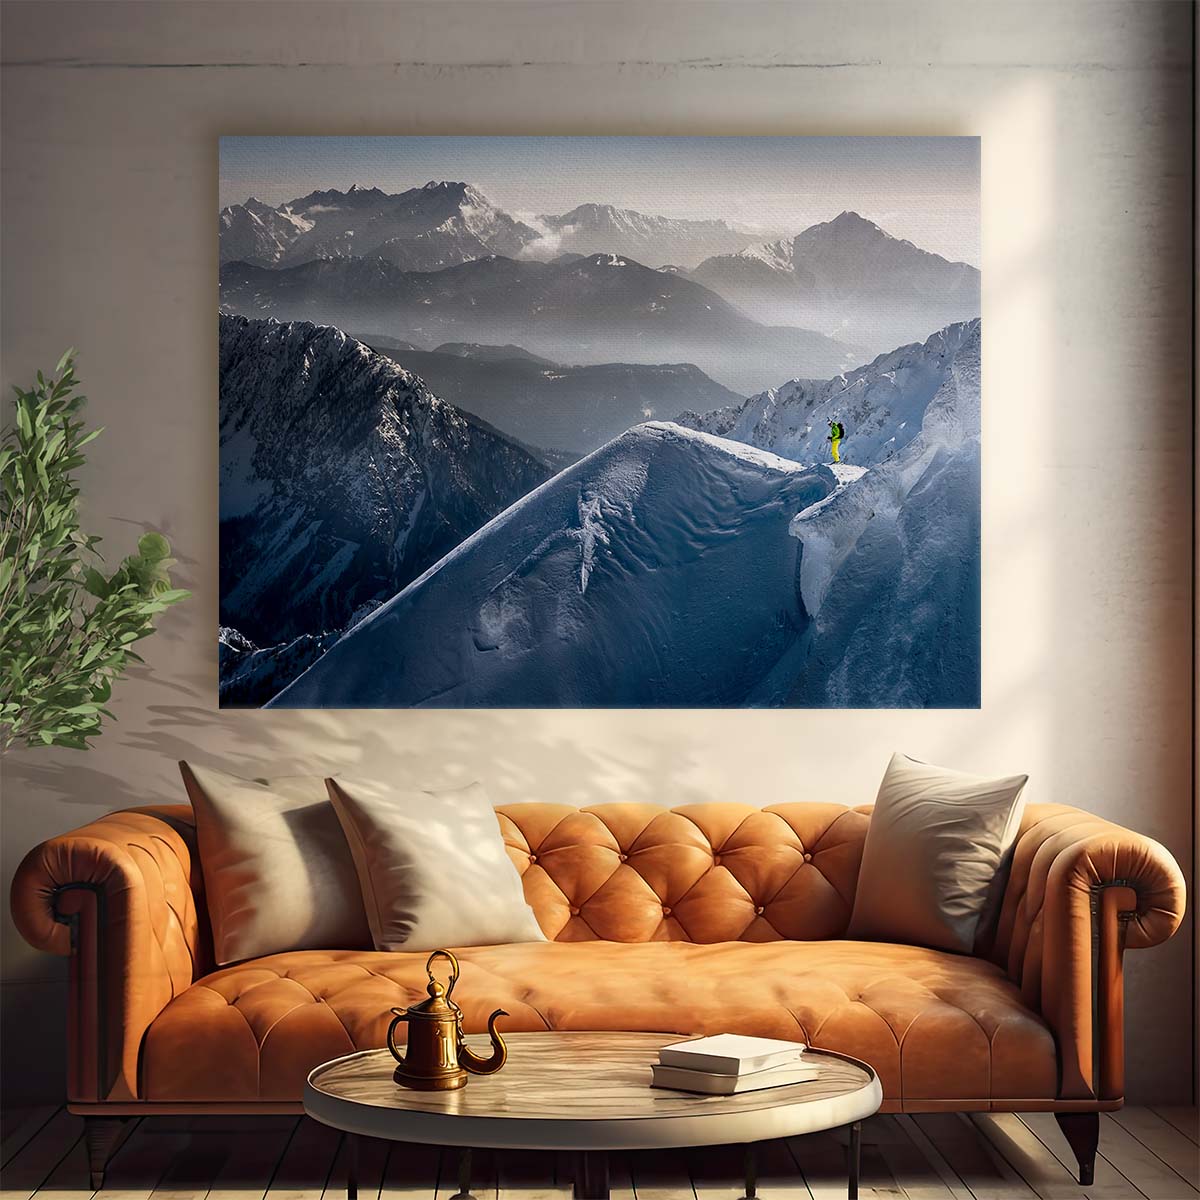 Alpine Ski Adventure SnowCapped Mountains Wall Art by Luxuriance Designs. Made in USA.